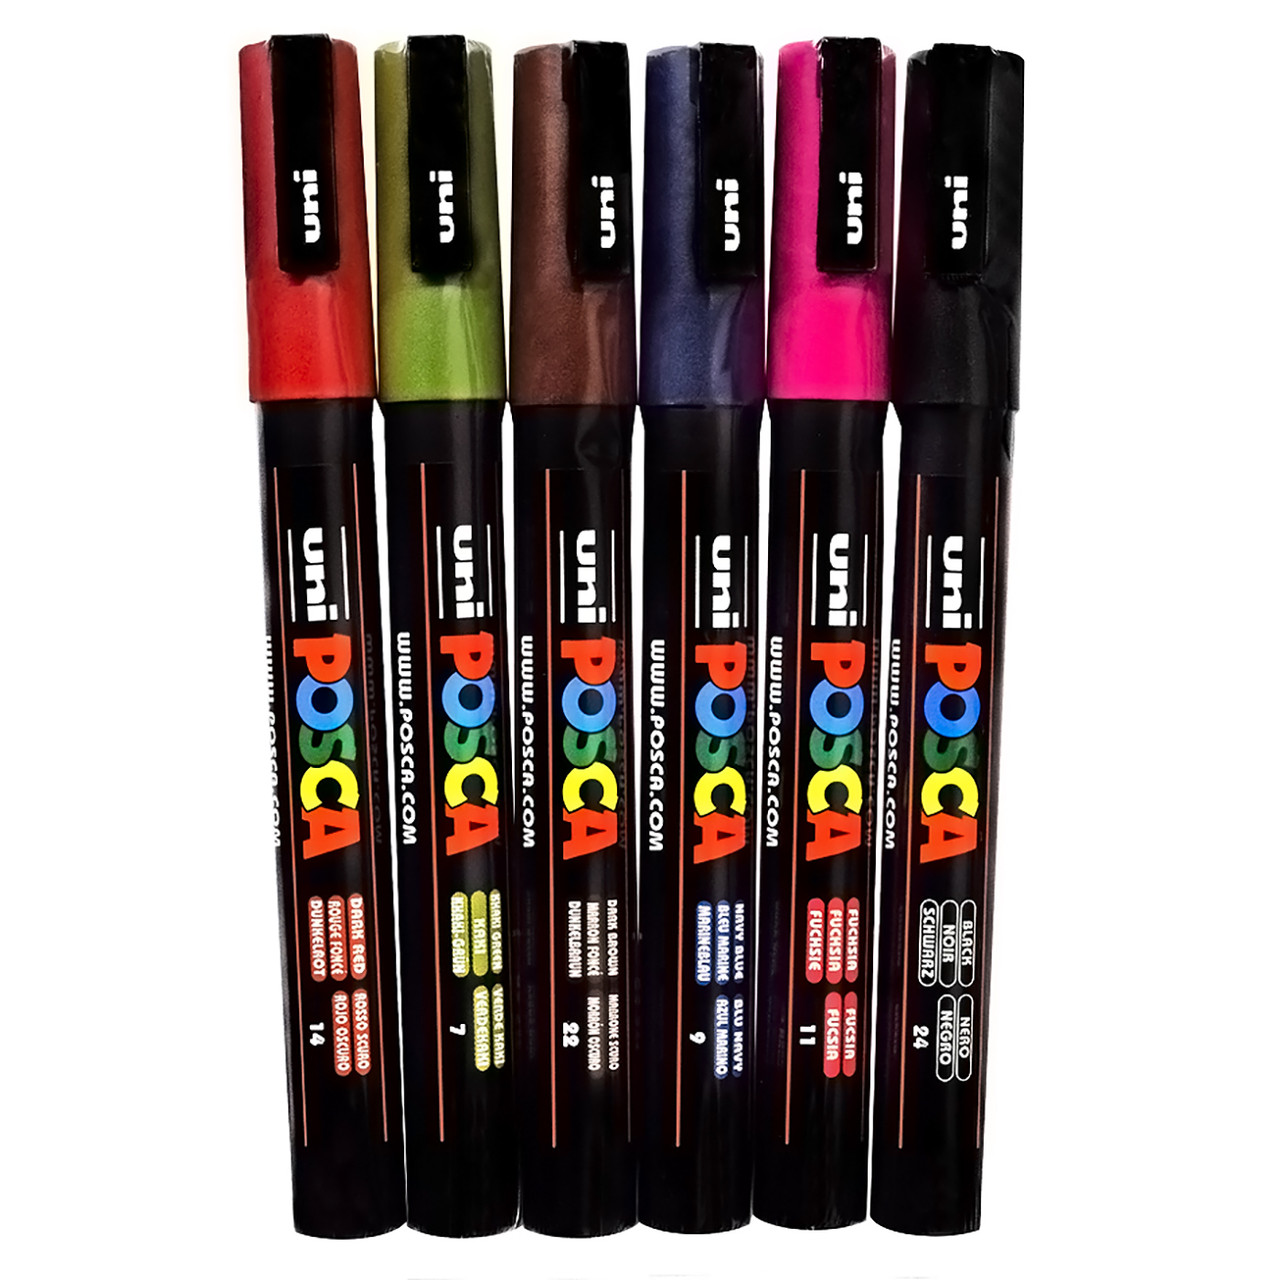 24 Posca Paint Markers, 3M Fine Posca Markers with India